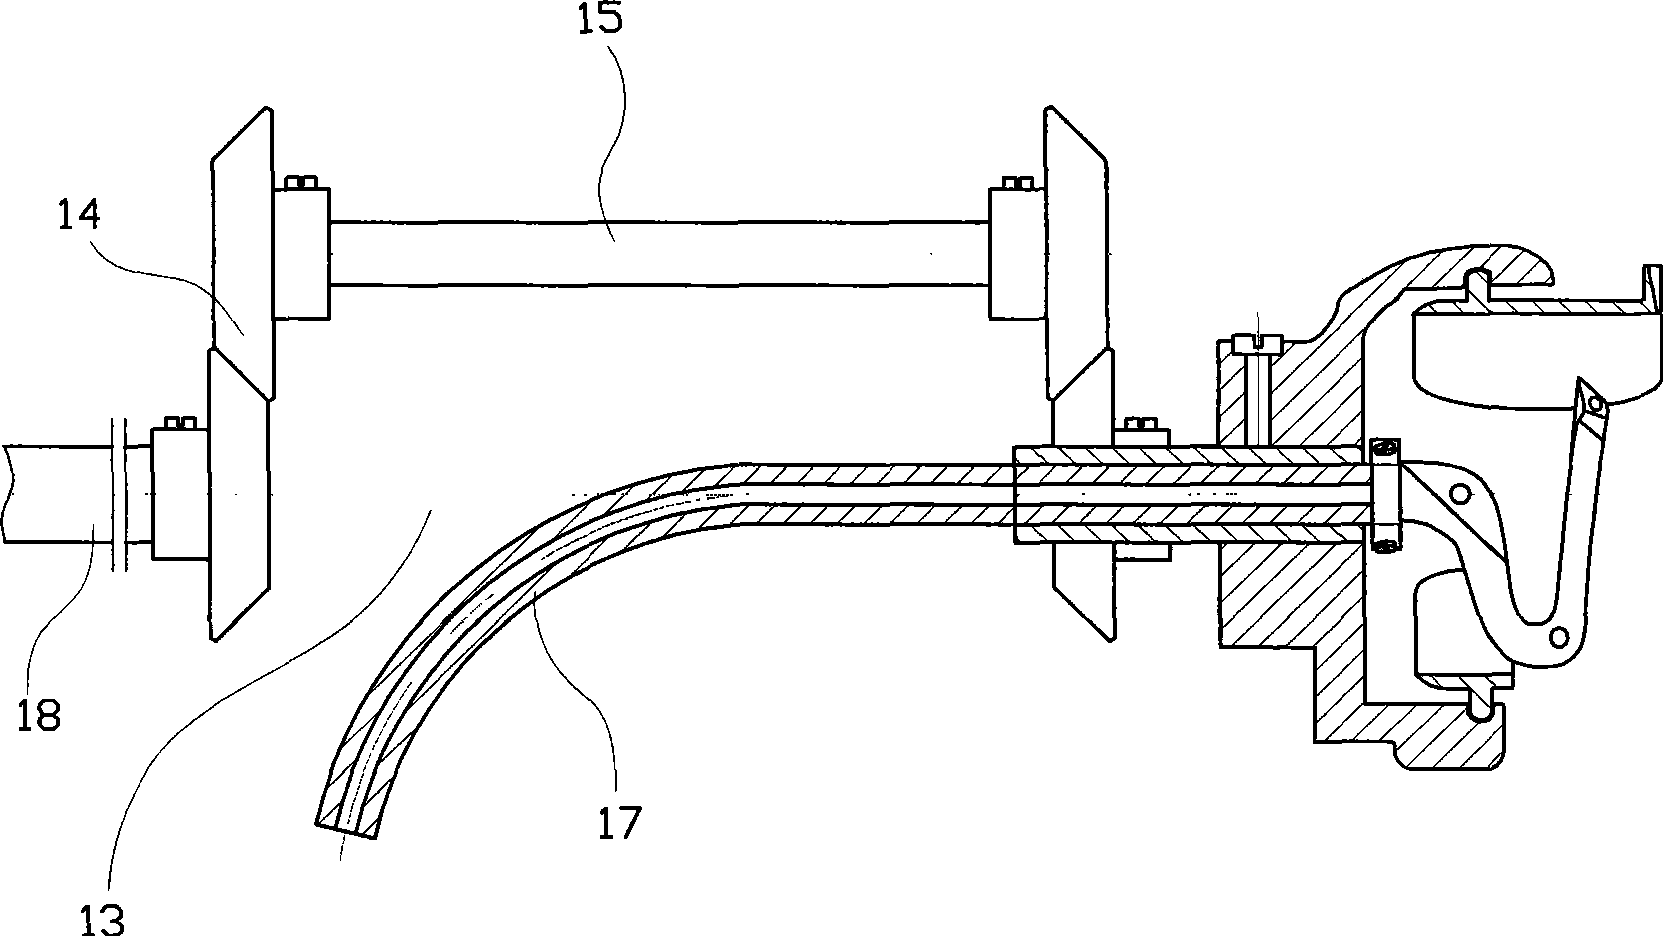 Sewing machine shuttle for continuously feeding ground thread